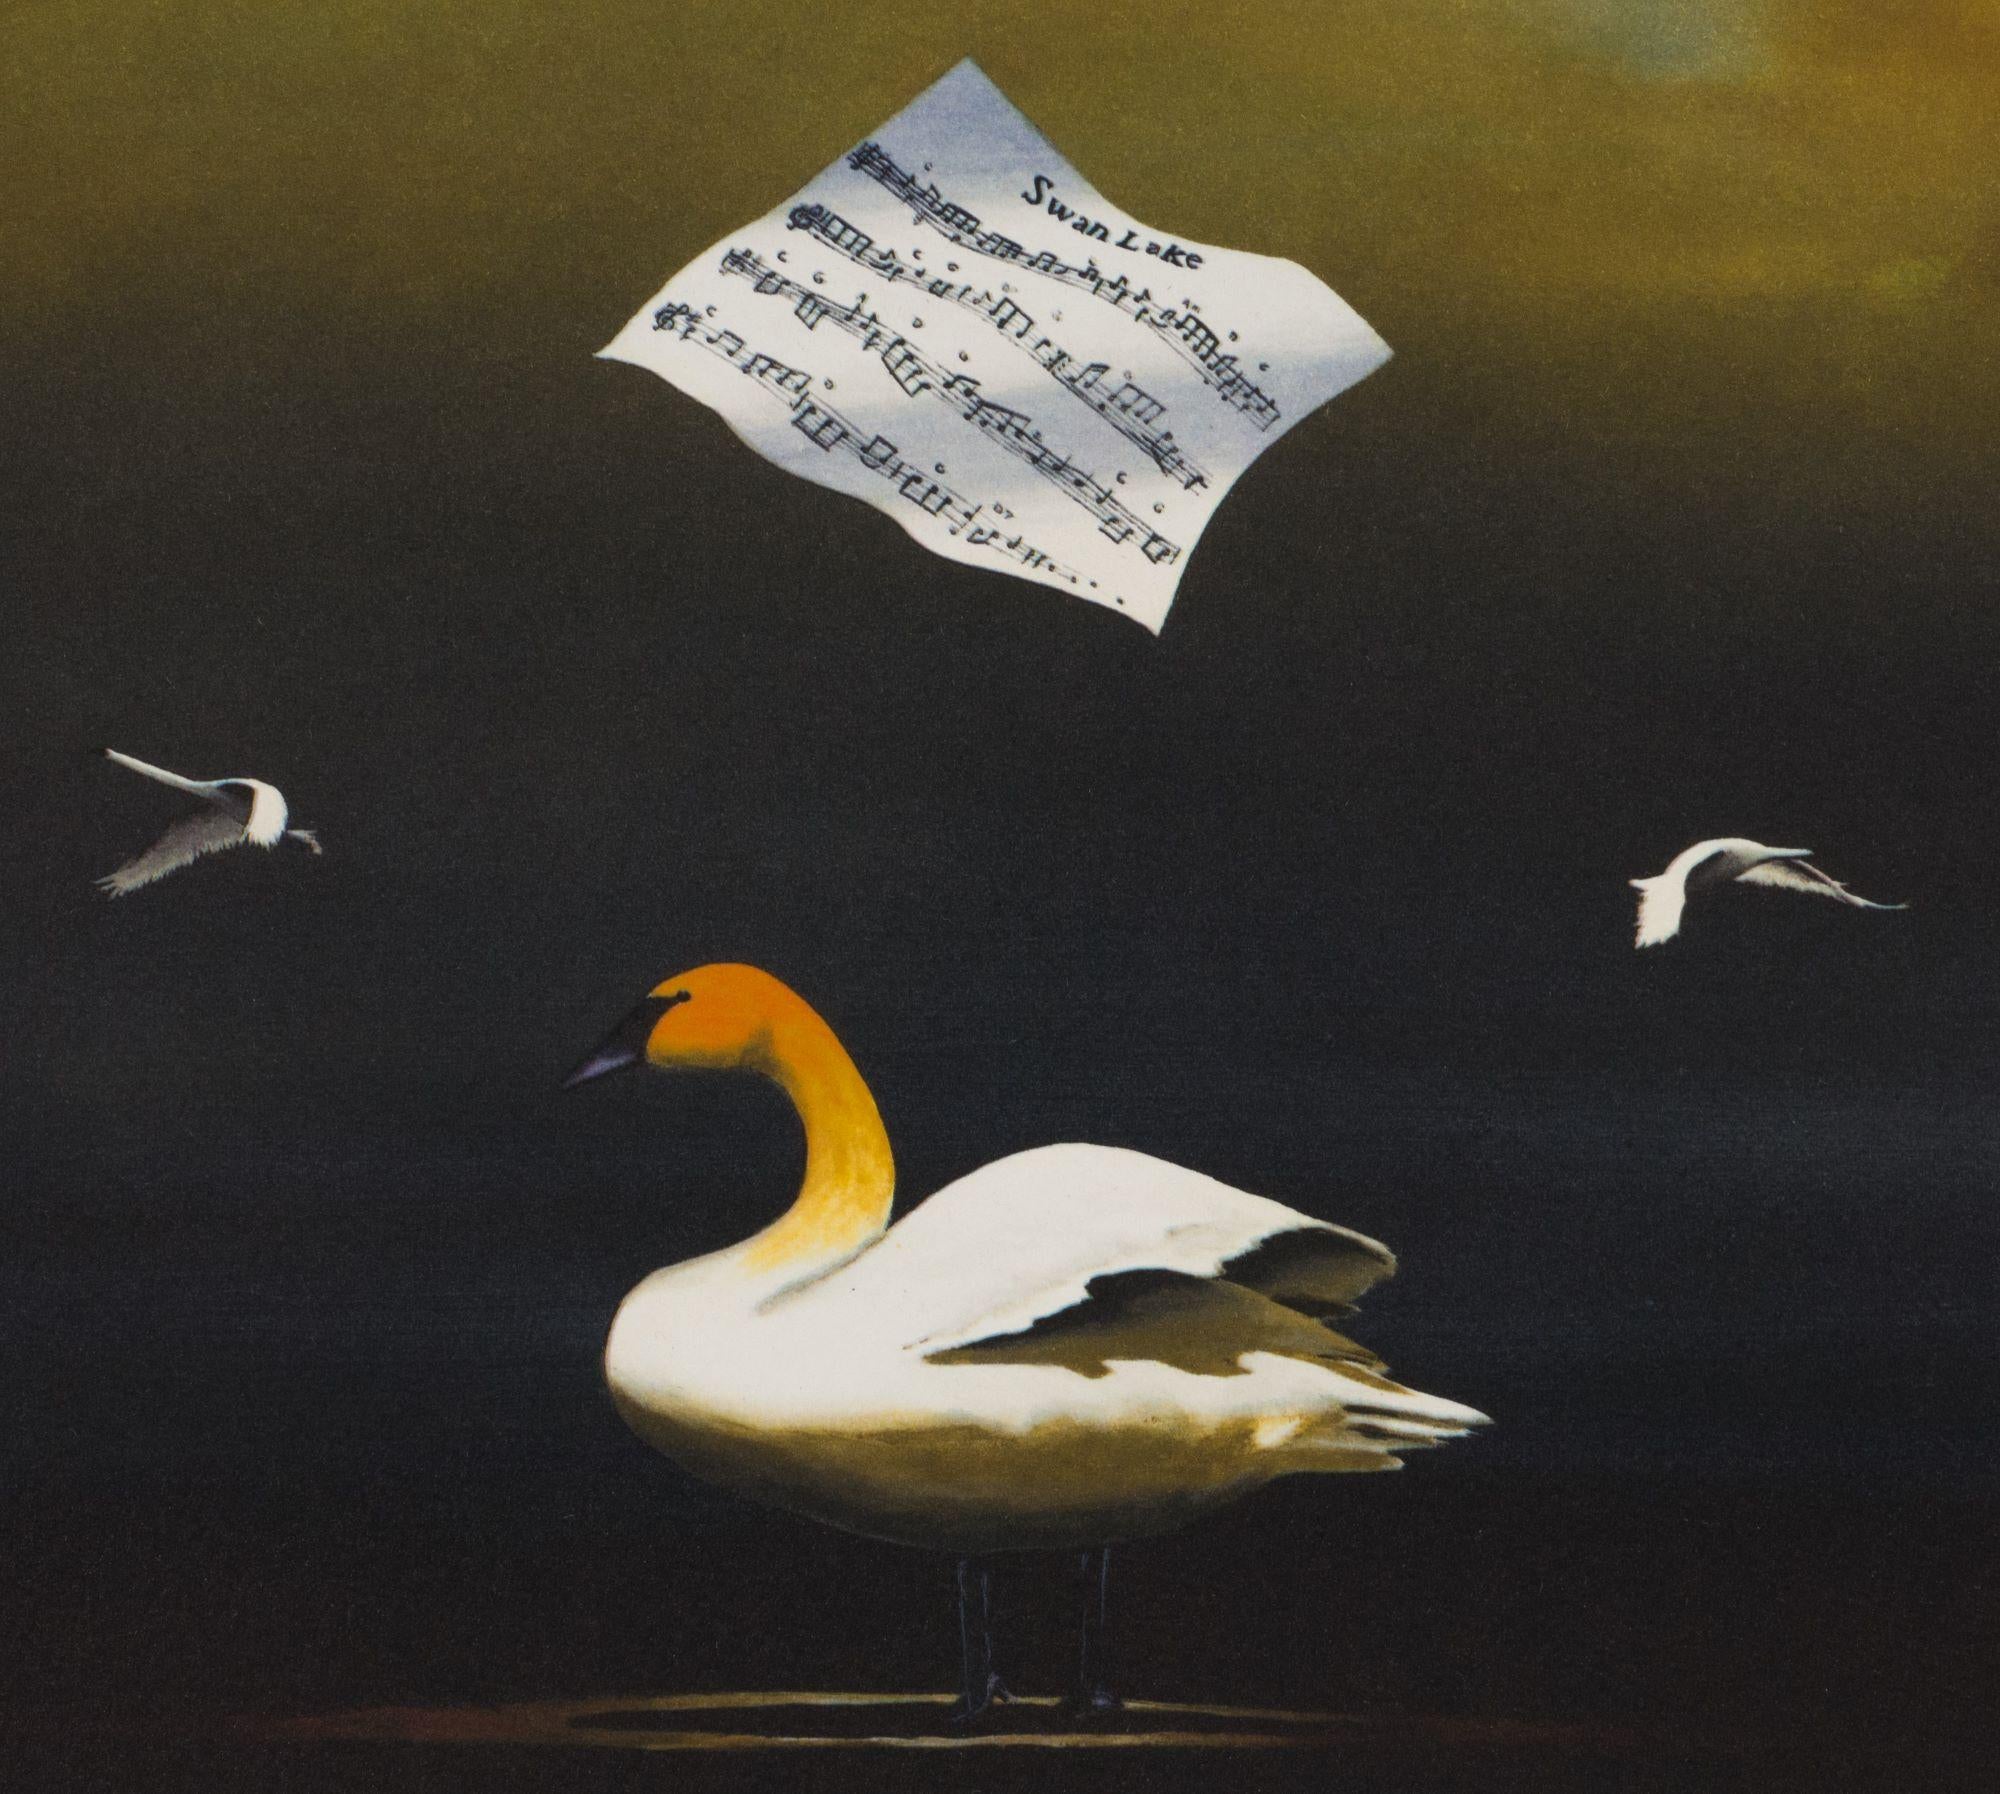 The Swan Song is a lithograph on paper, 9.25 x 9 inches  image size, and initialed 'BD' lower right. From the edition of 395, numbered 119/275 (there were also 100 Roman and 20 AP). Framed in a contemporary, silver-tone frame.

Robert Deyber’s